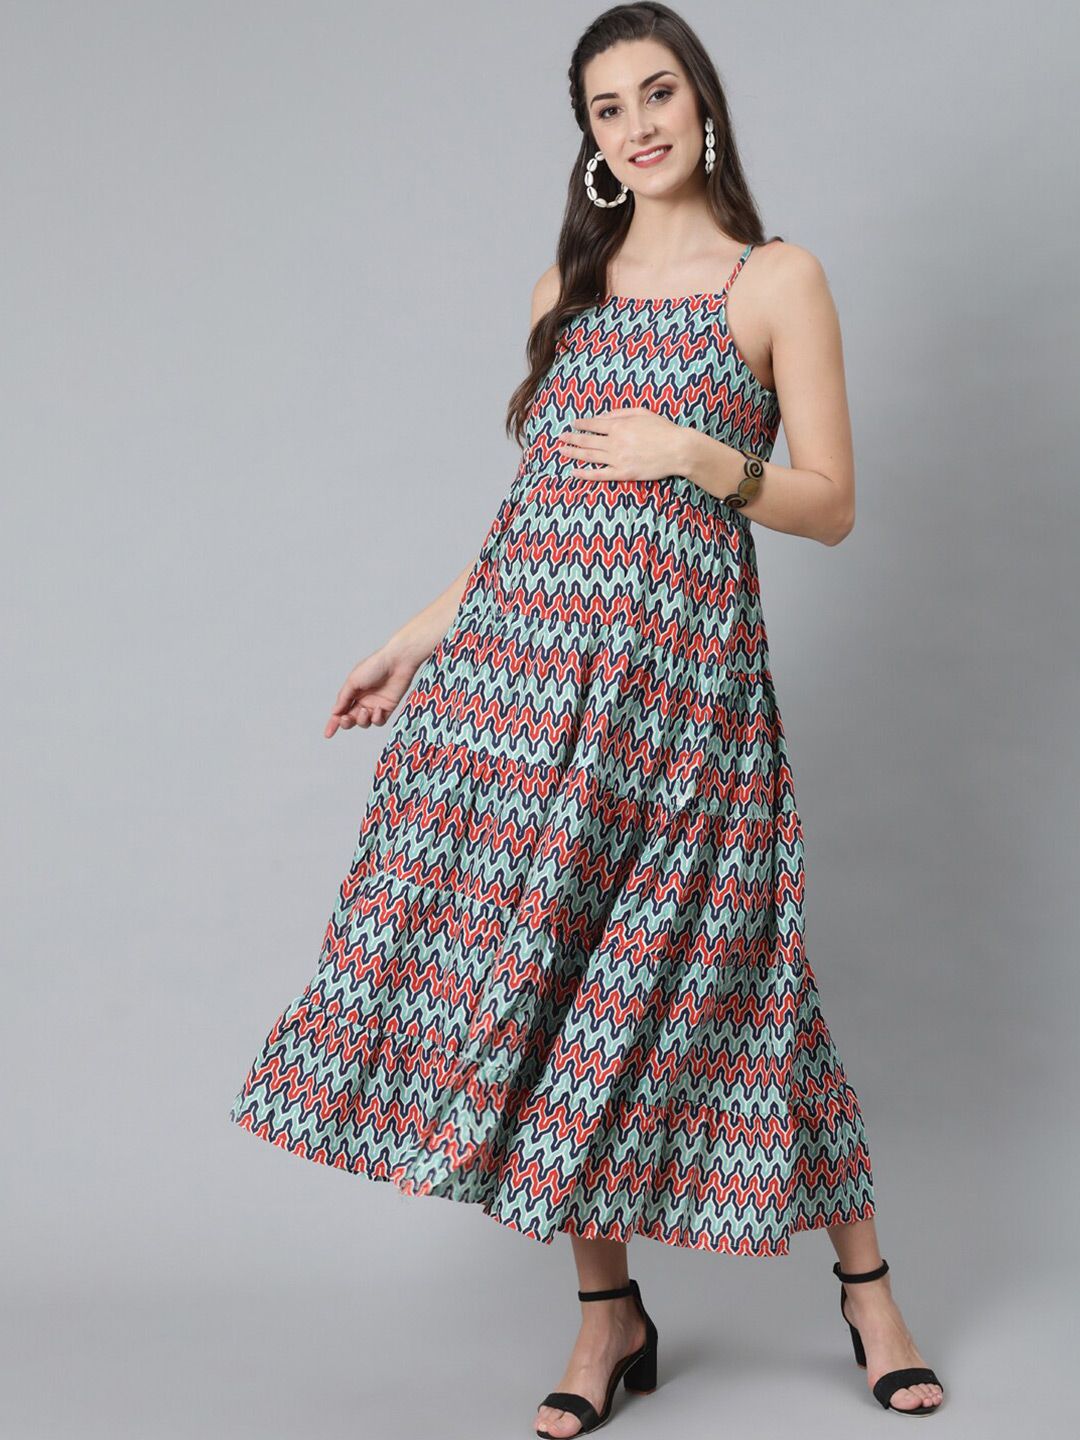 AKS Shoulder Strap Ethnic Motifs Printed Maternity Fit And Flare Cotton Maxi Dress Price in India